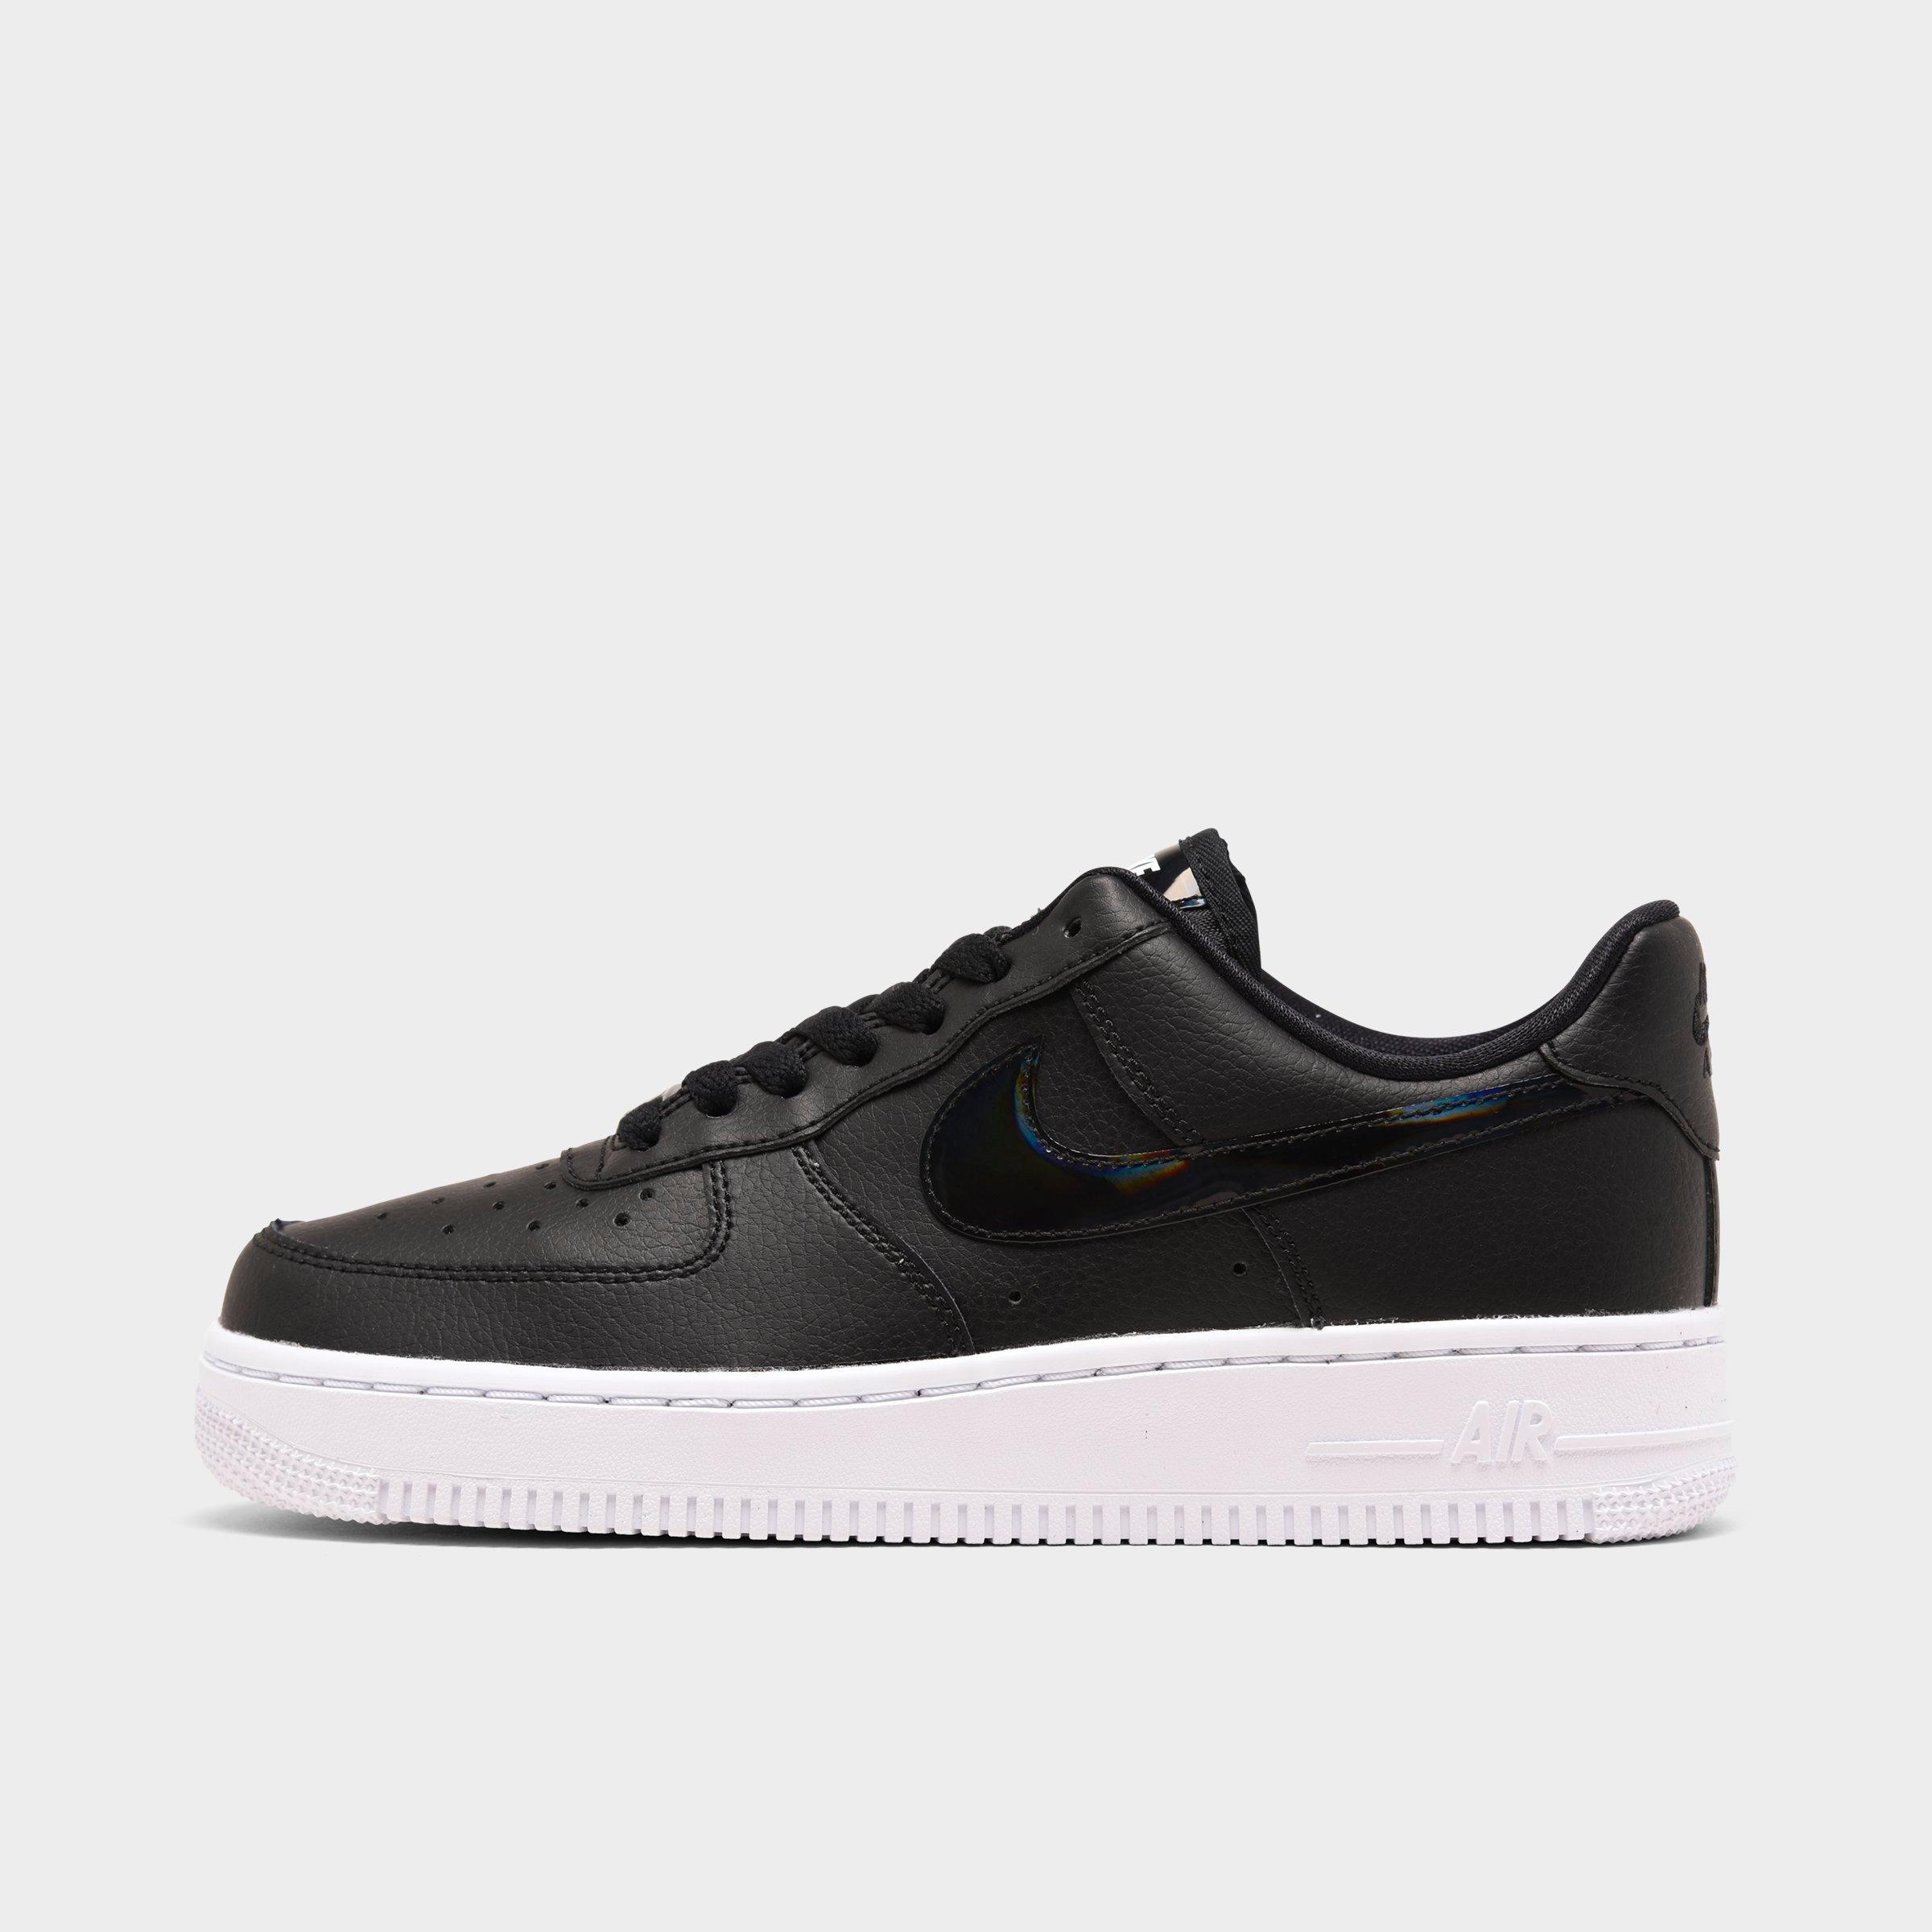 finish line womens air force 1